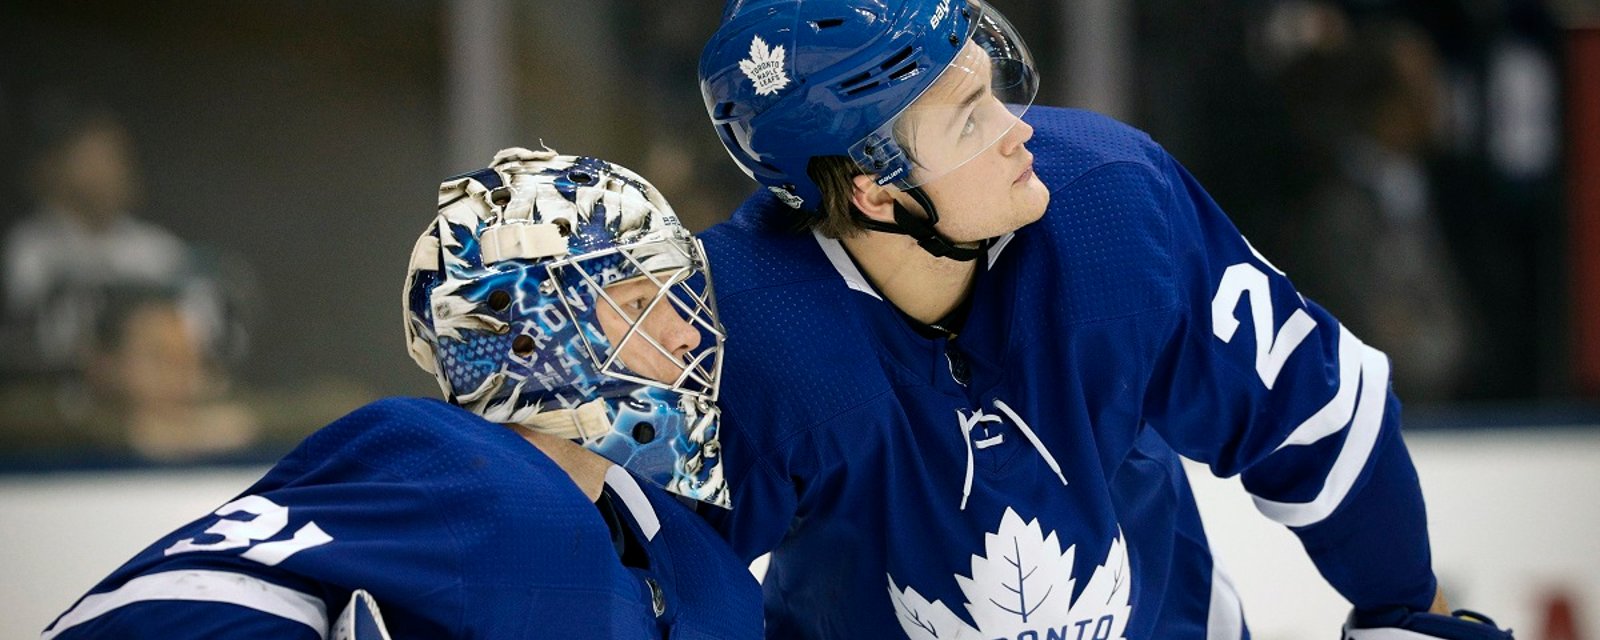 Breaking: Big development in Nylander negotiations on Monday could determine his future.